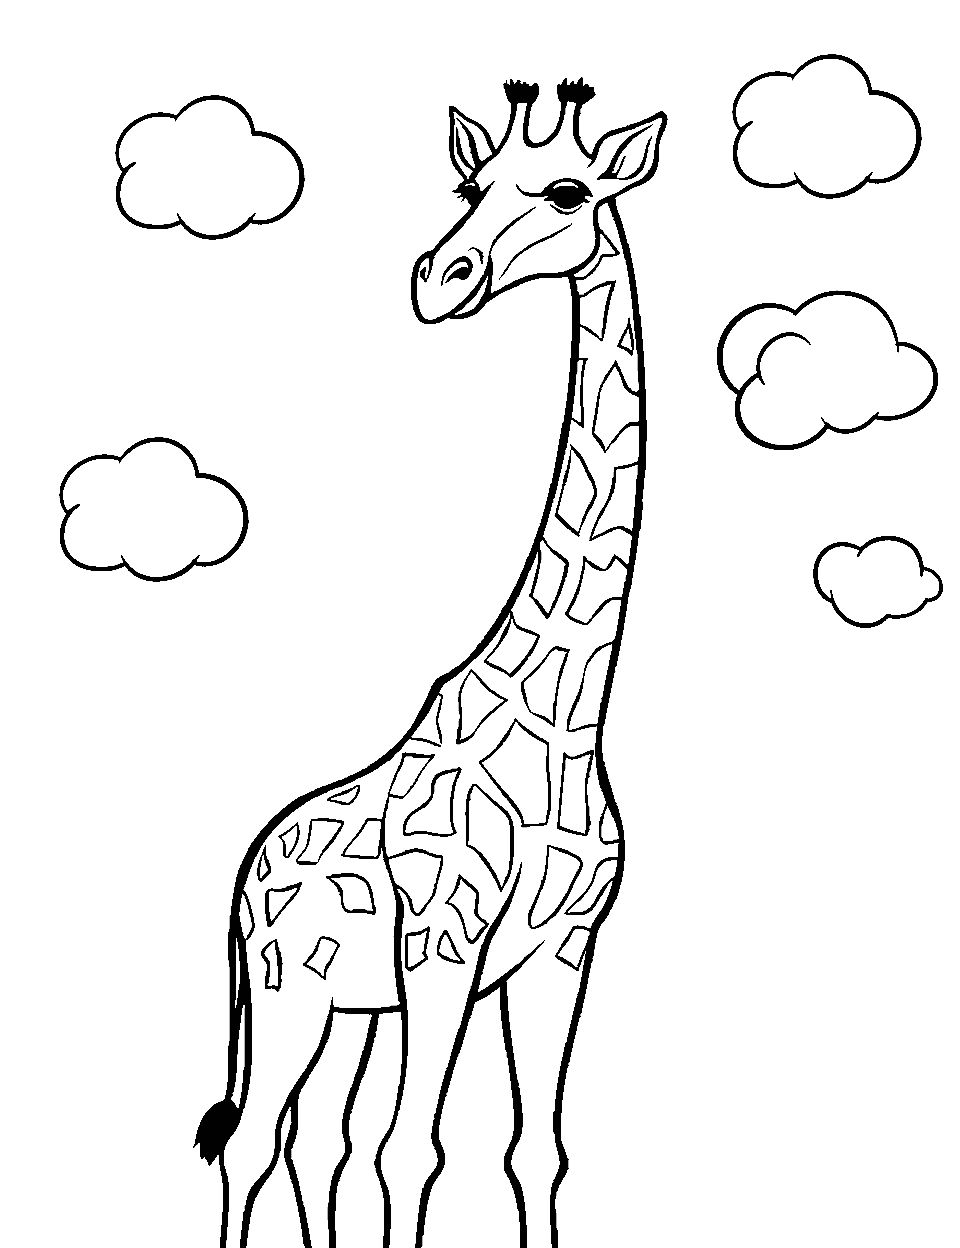 Cloud Grazing Giraffe Coloring Page - A giraffe reaching out to touch the clouds.